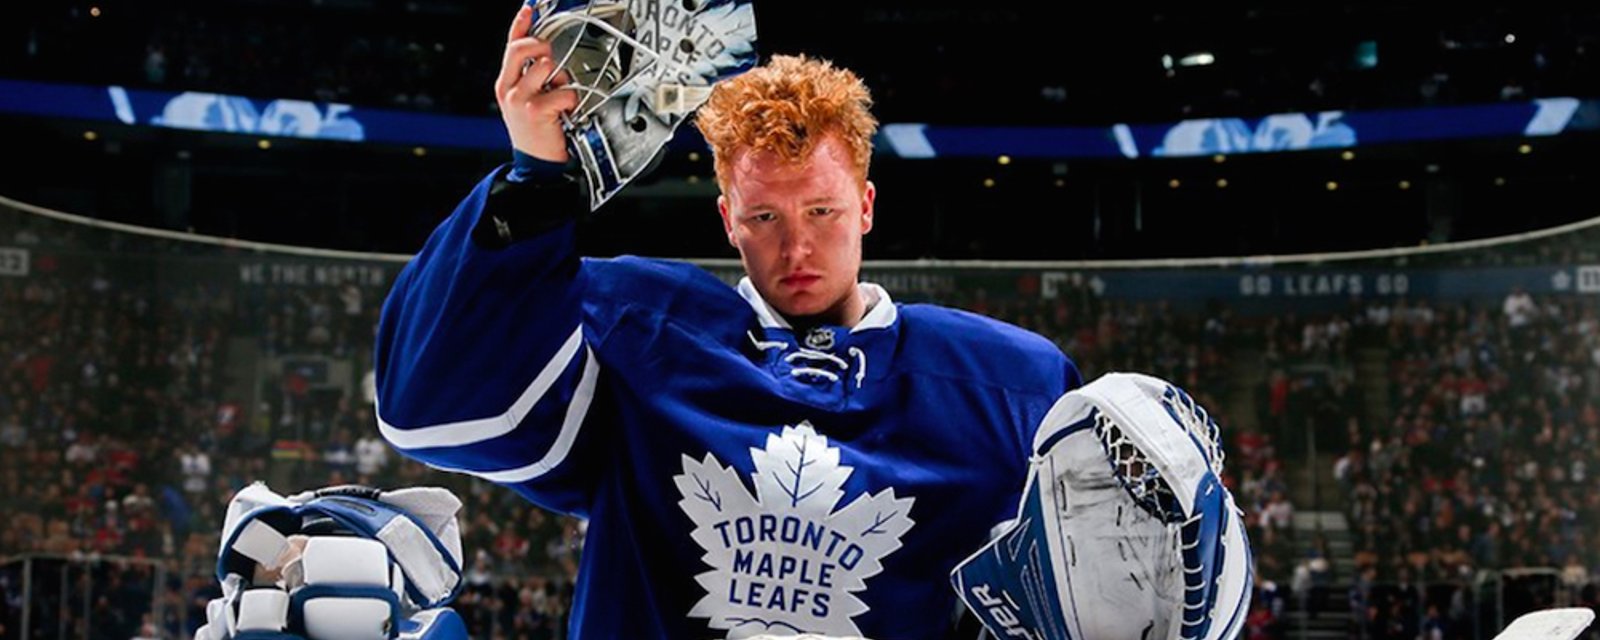 Rumor: Andersen's days with the Leafs may be over